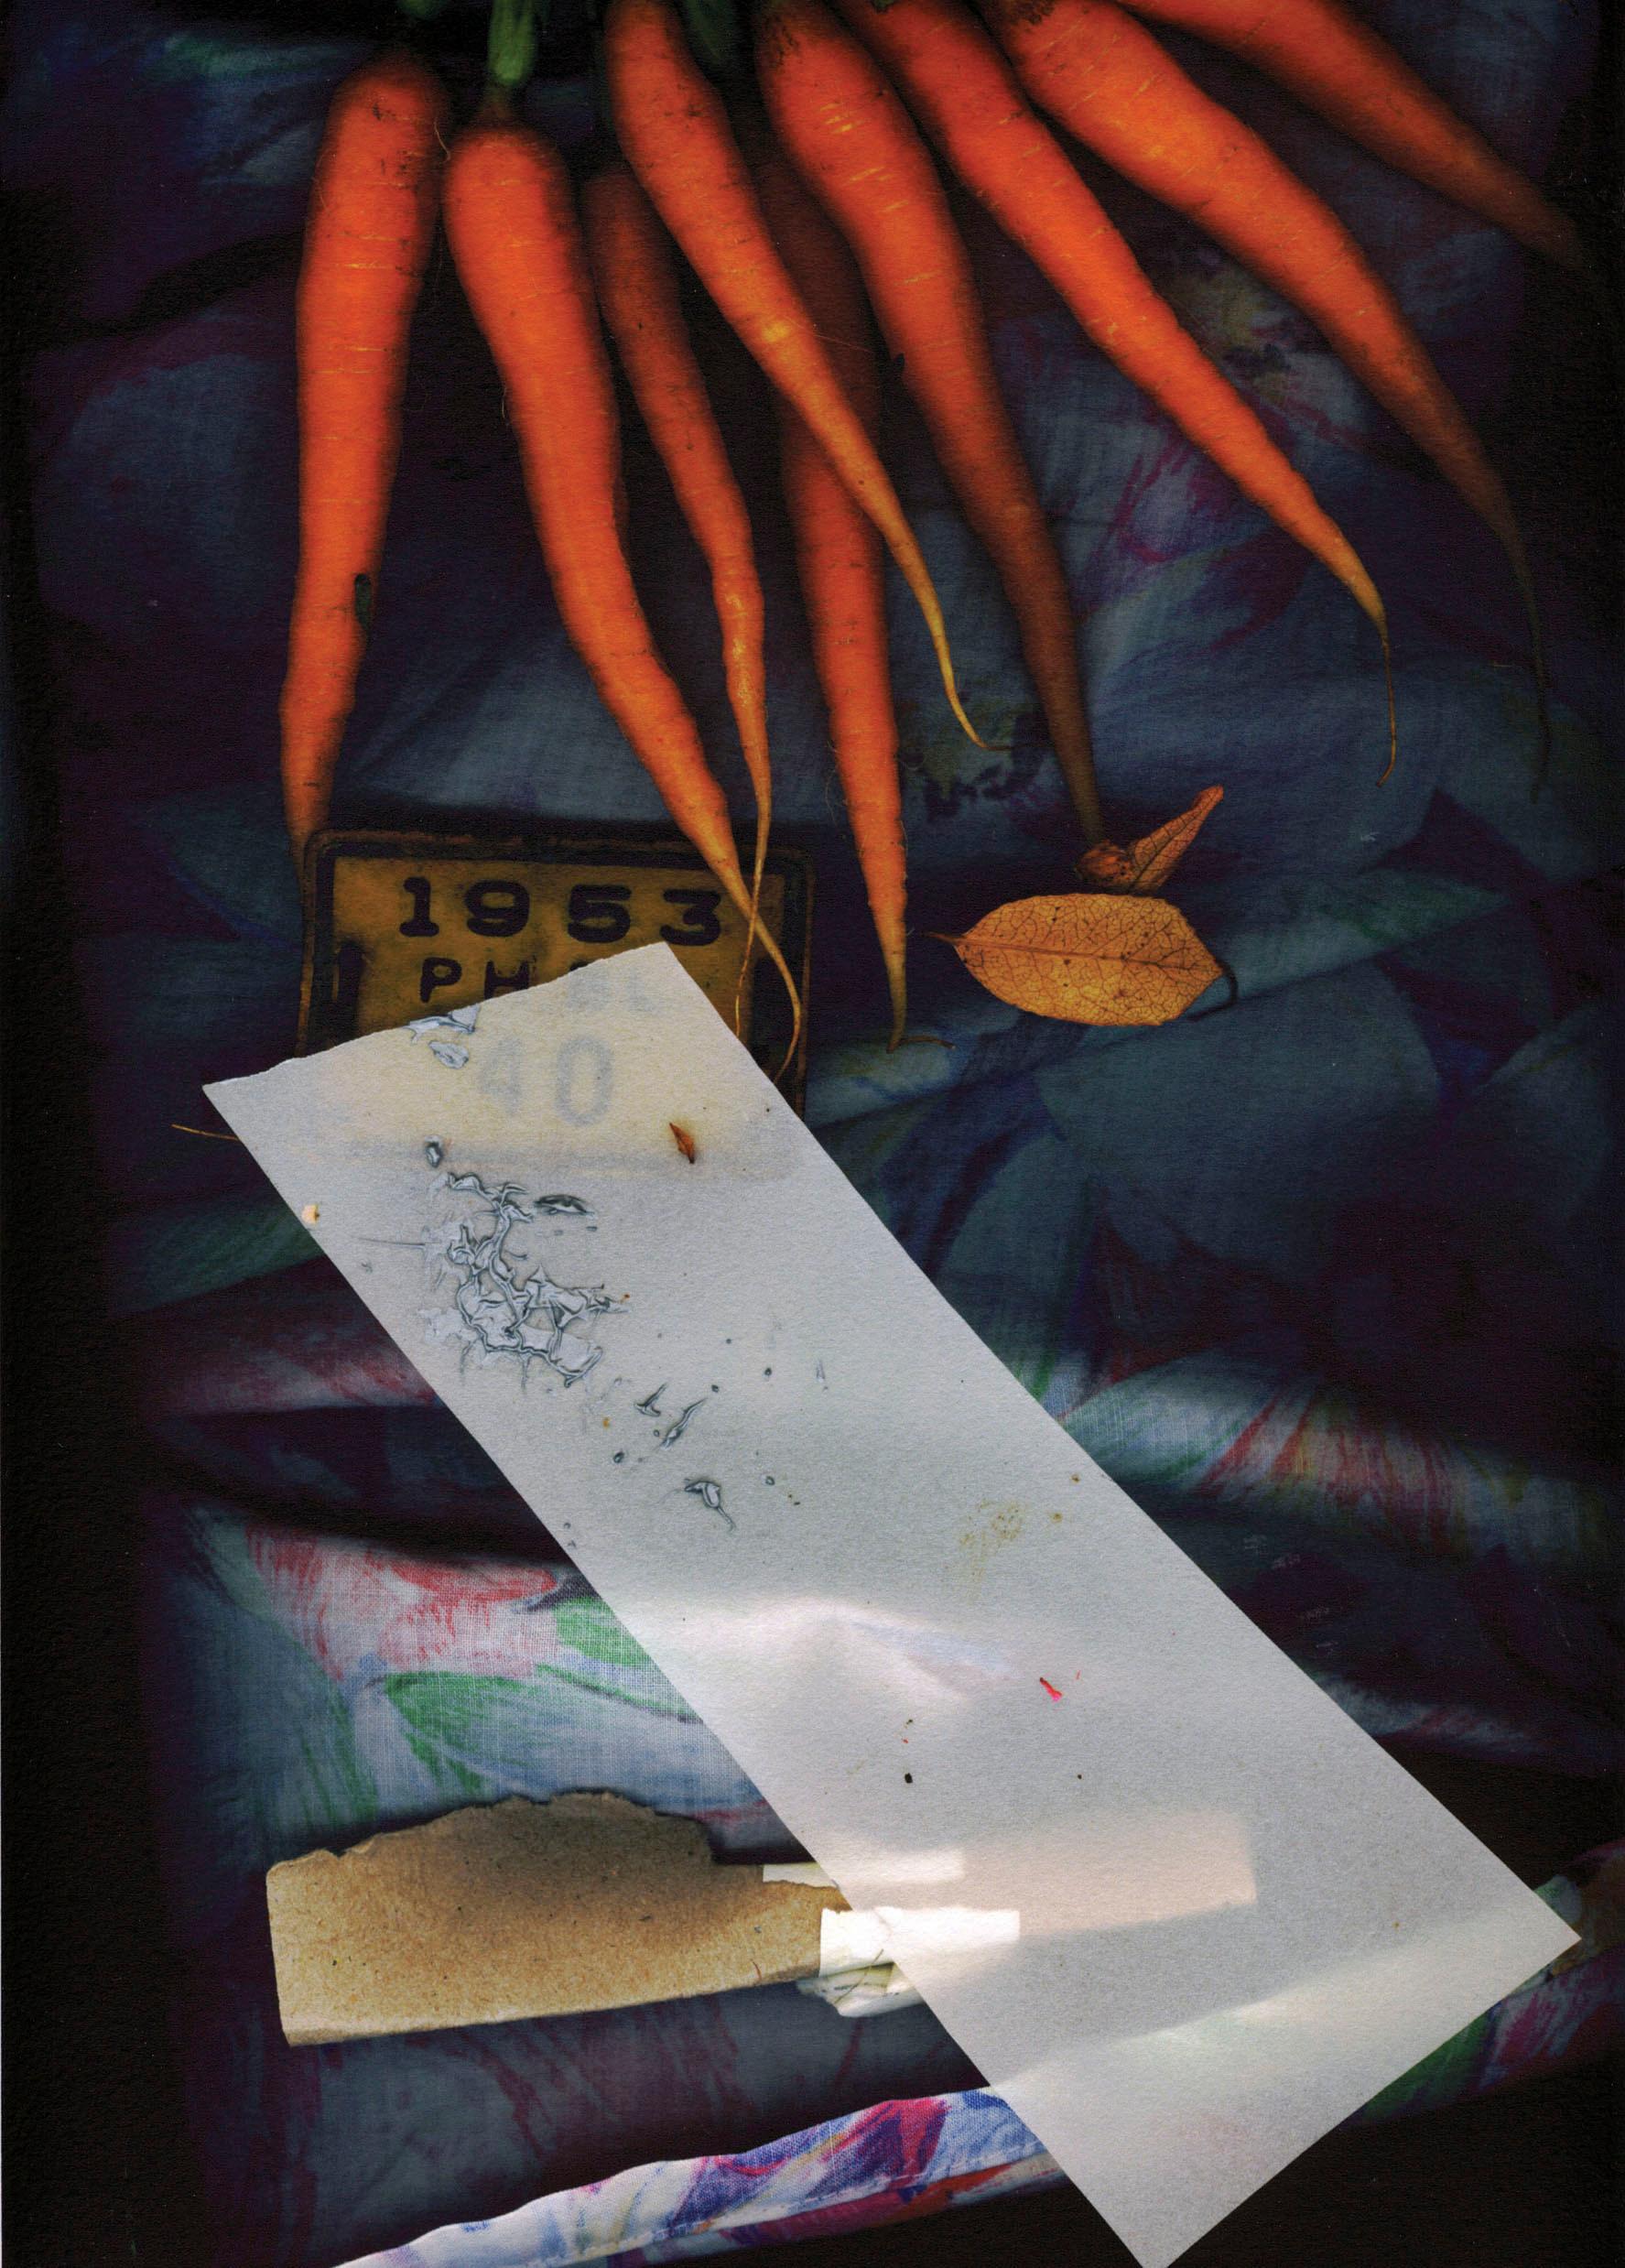 Carrotid Scan, 1995 - Photograph by Darryl Curran